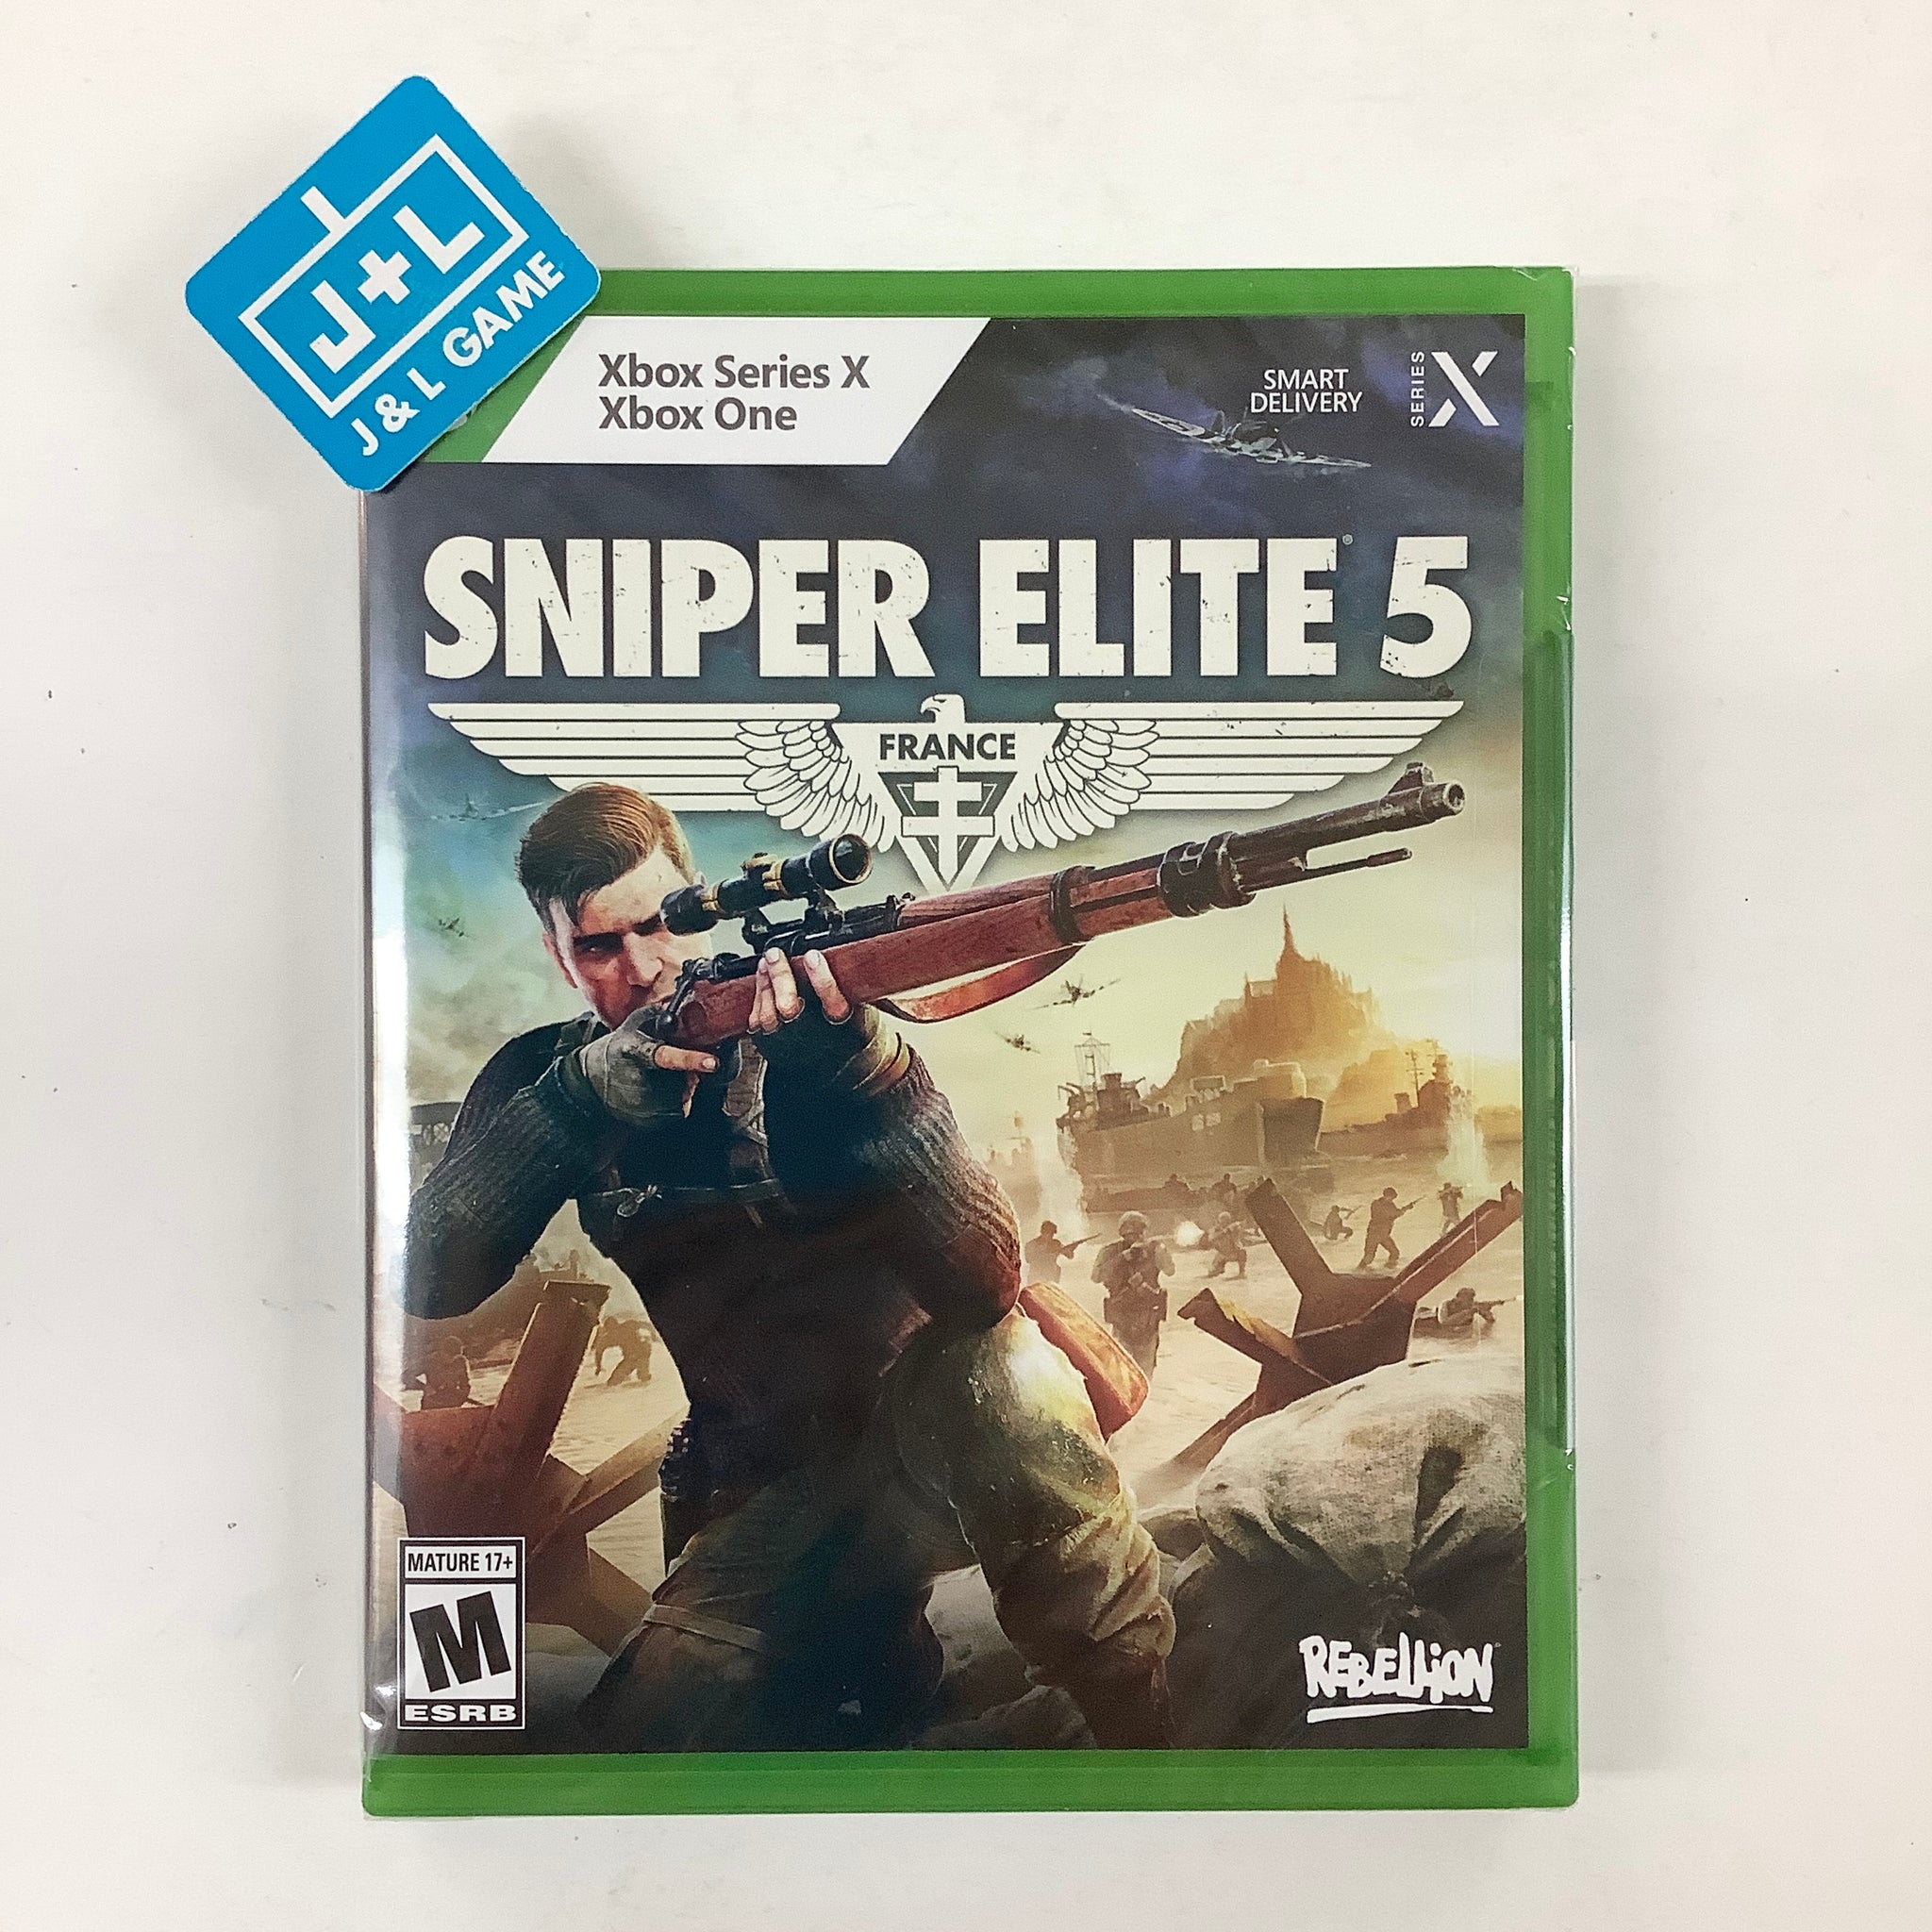 Sniper Elite 5 - (XSX) Xbox Series X Video Games Sold Out   